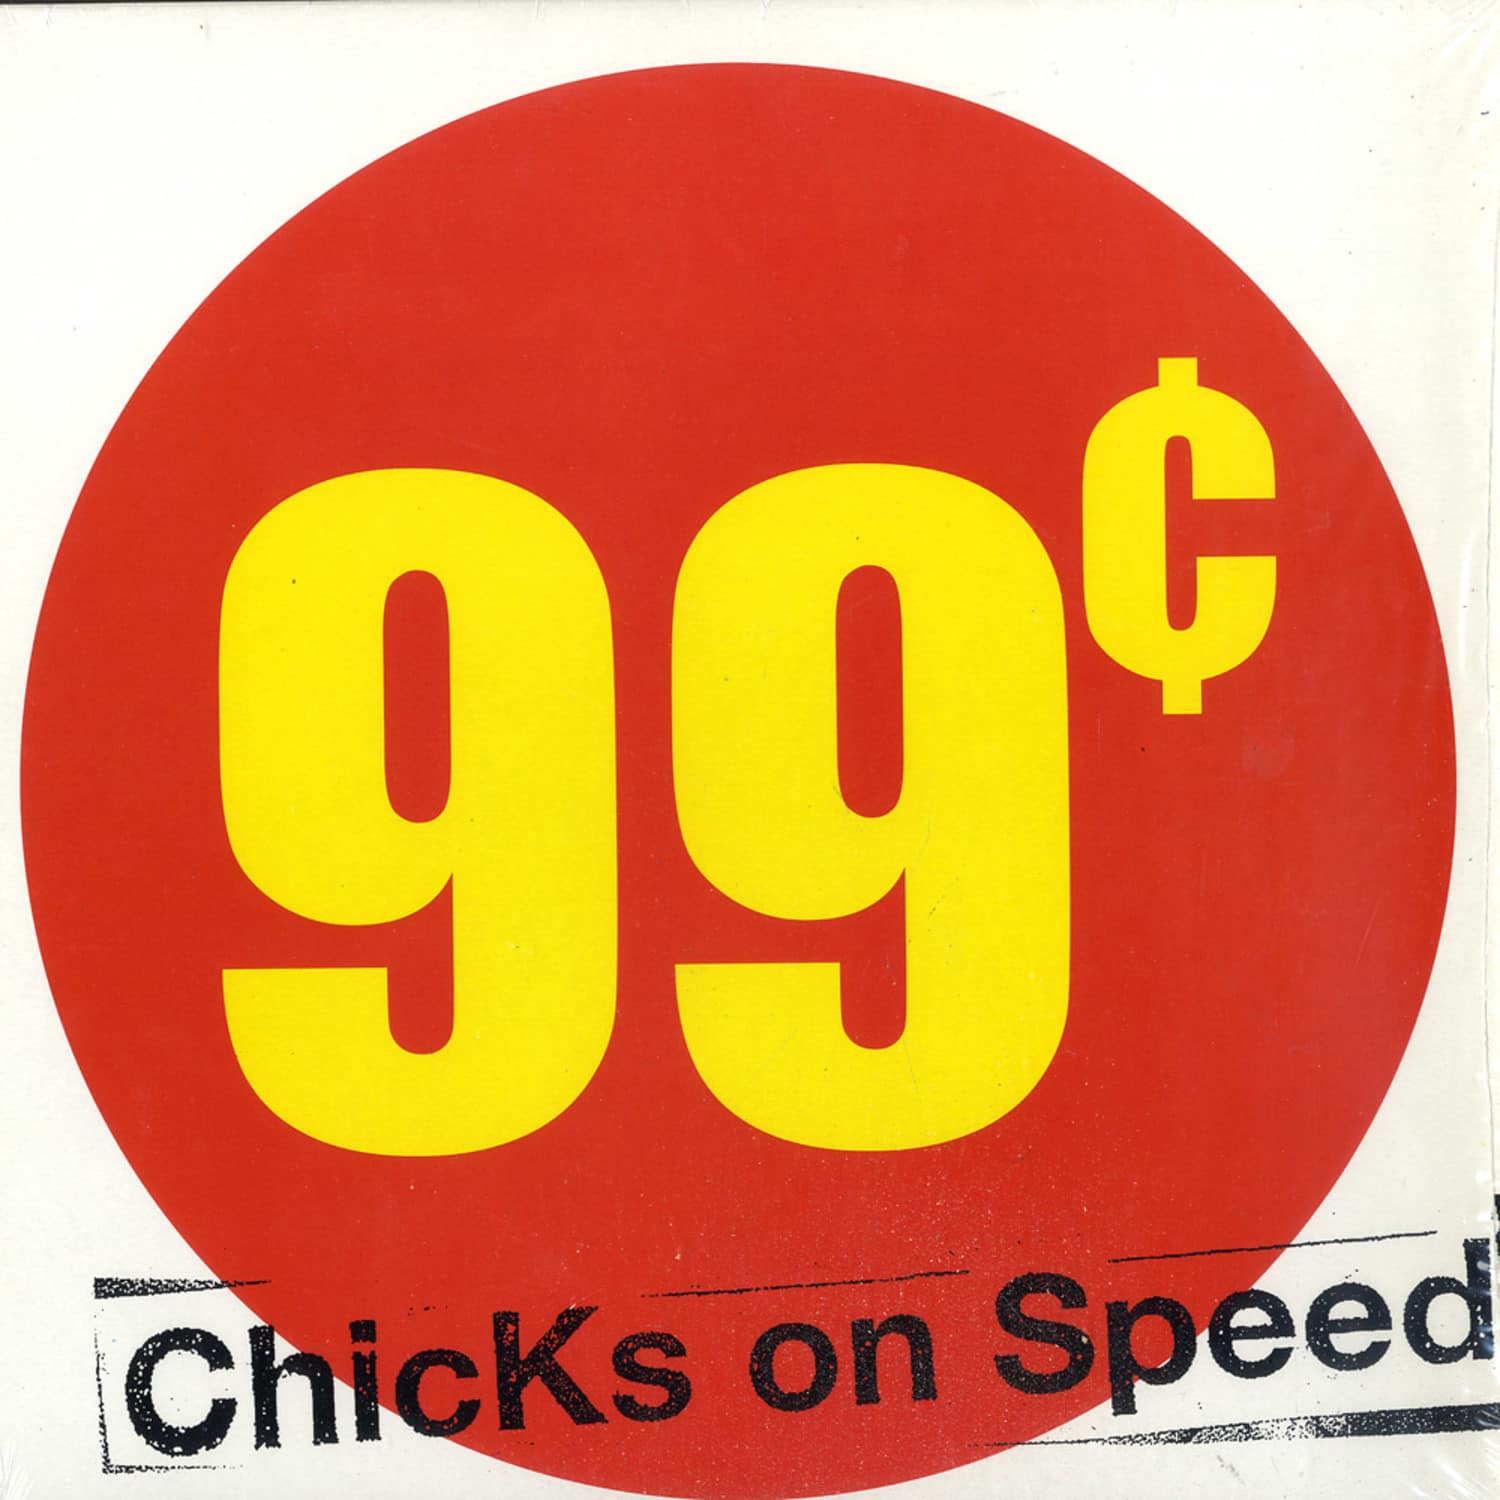 CHICKS ON SPEED - 99 CENTS 